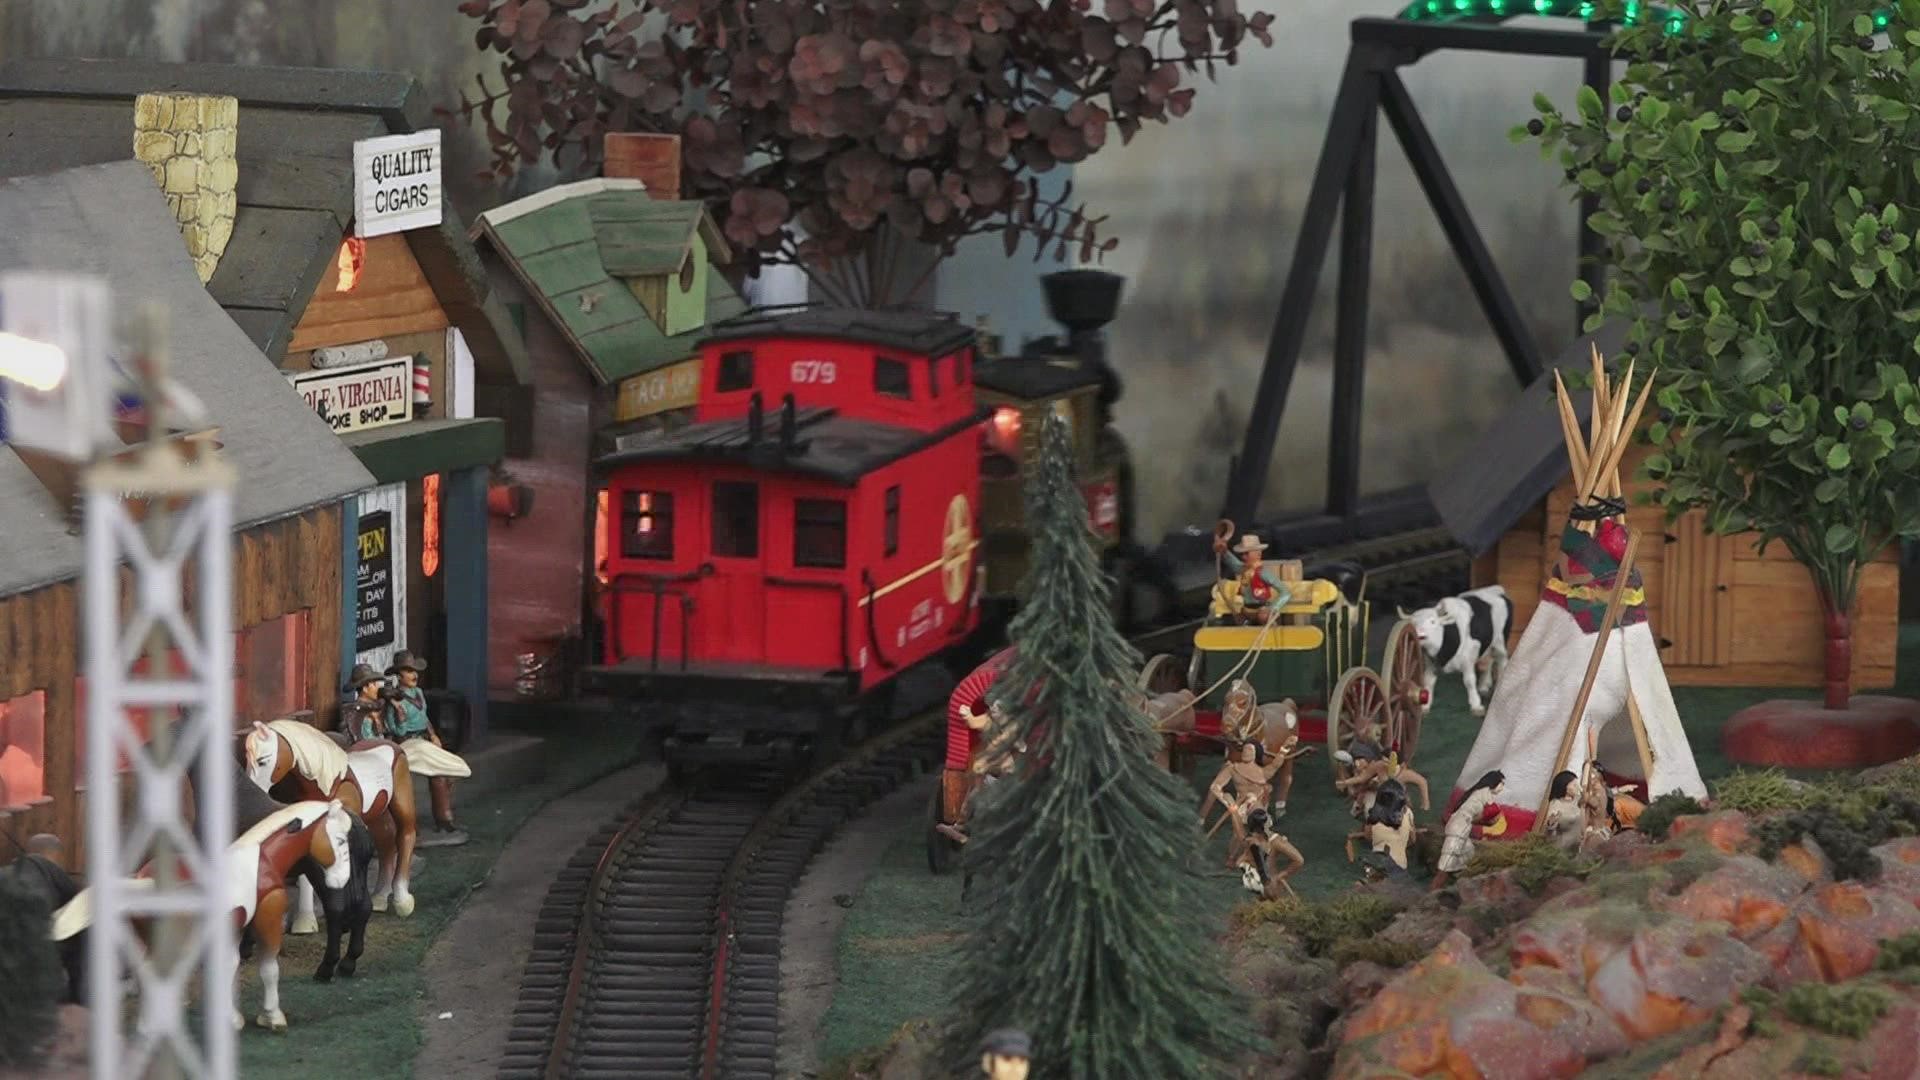 If you love model trains, this is your place to visit!